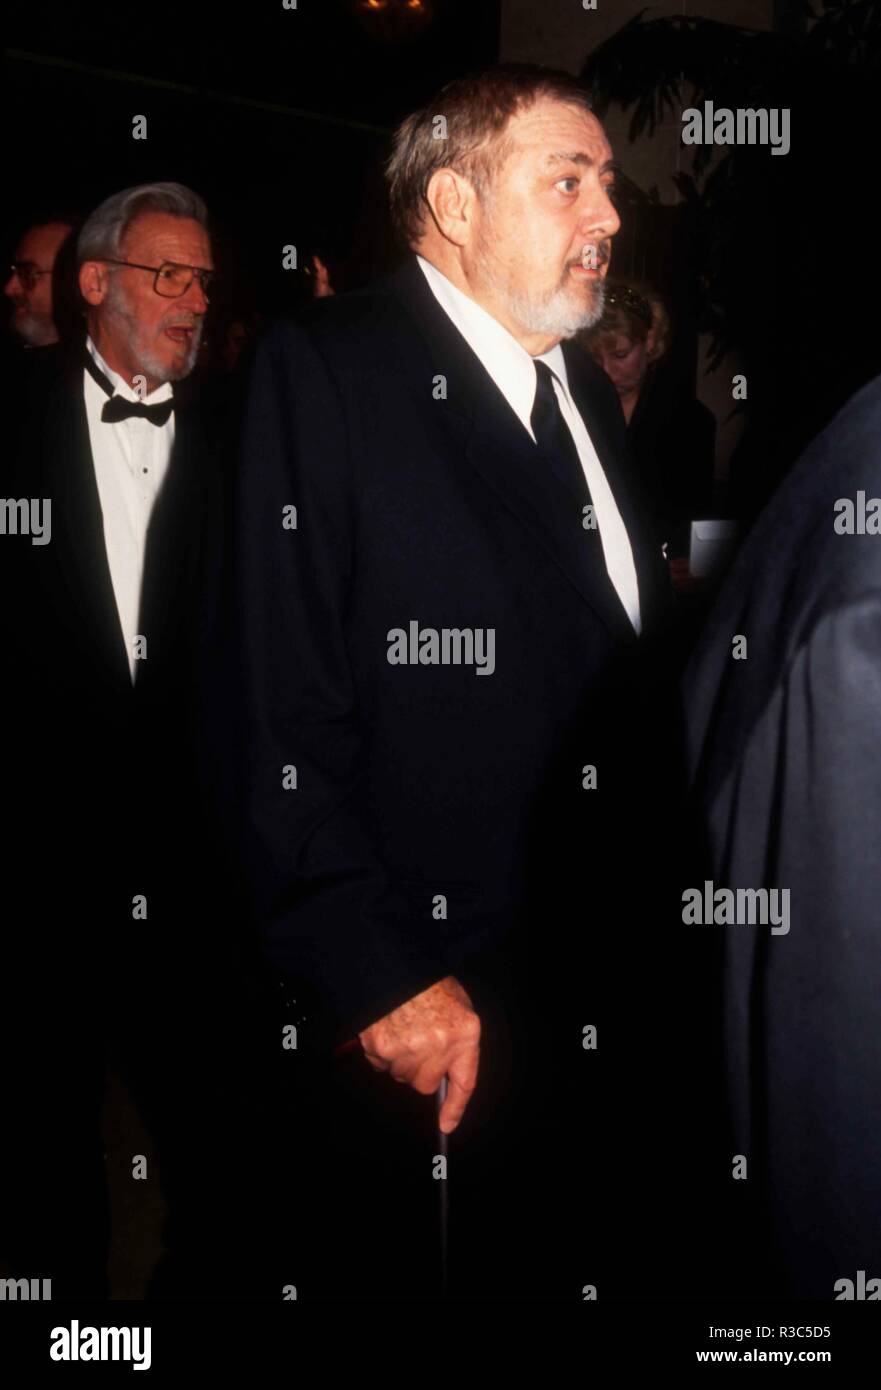 BEVERLY HILLS, CA - JANUARY 29: Actor Raymond Burr attends The Daily Variety Salutes Army Archerd on January 29, 1993 at the Beverly Hilton Hotel in Beverly Hills, California. Photo by Barry King/Alamy Stock Photo Stock Photo